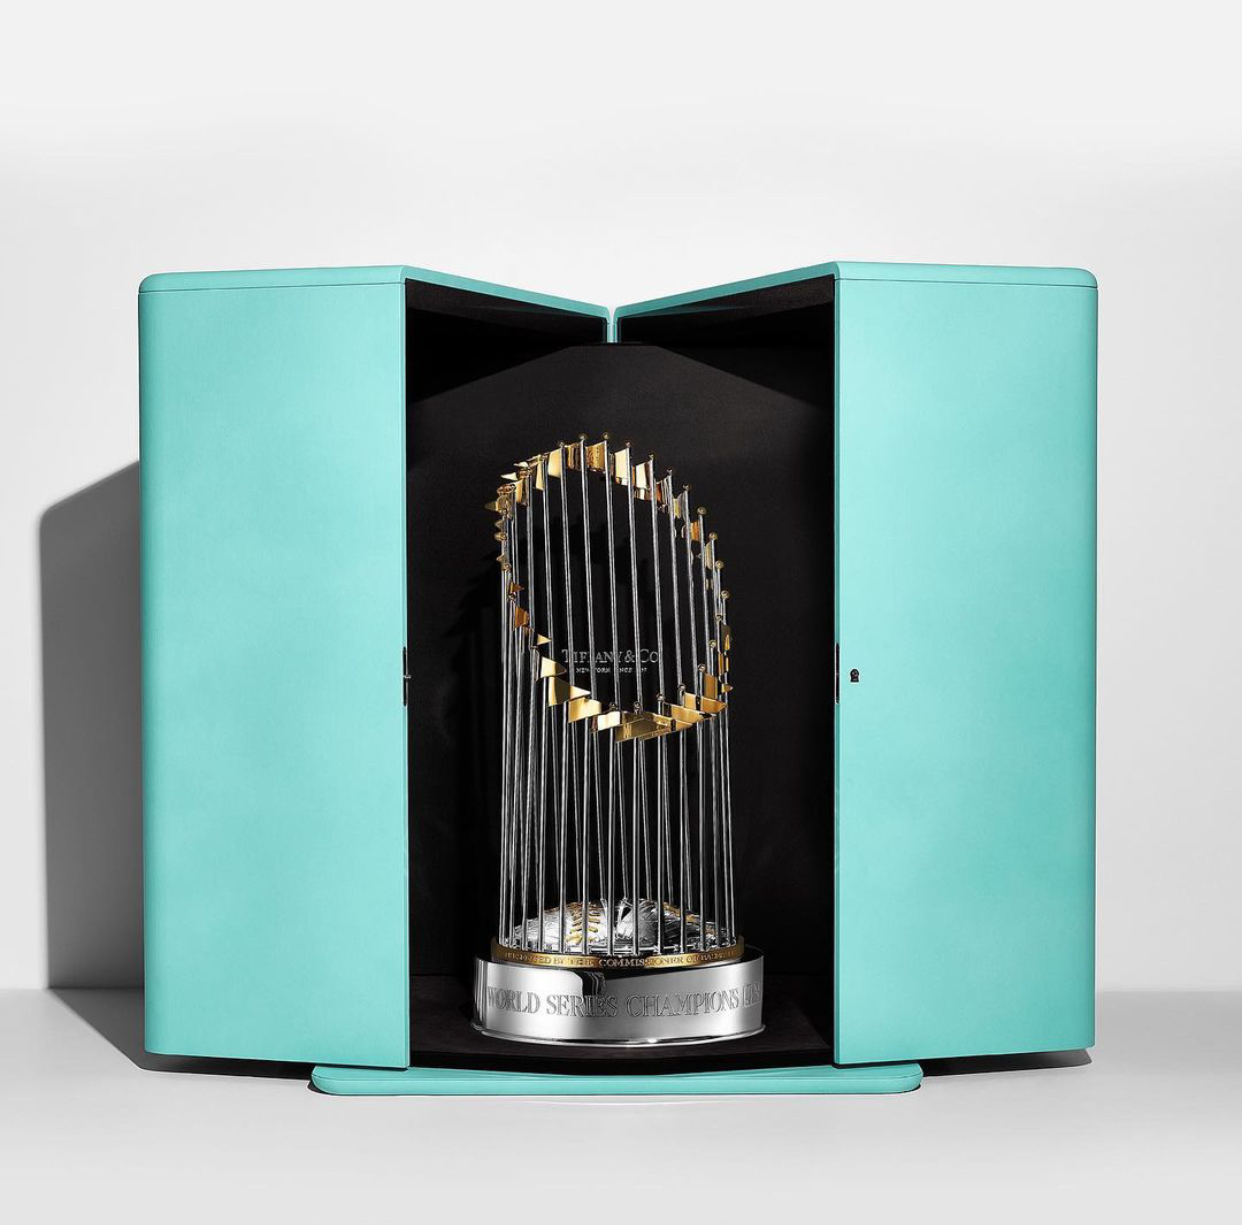 Major League Baseball® American League Championship Series (ALCS) Trophy.  Designed and handcrafted by Tiffany & Co. - Tiffany